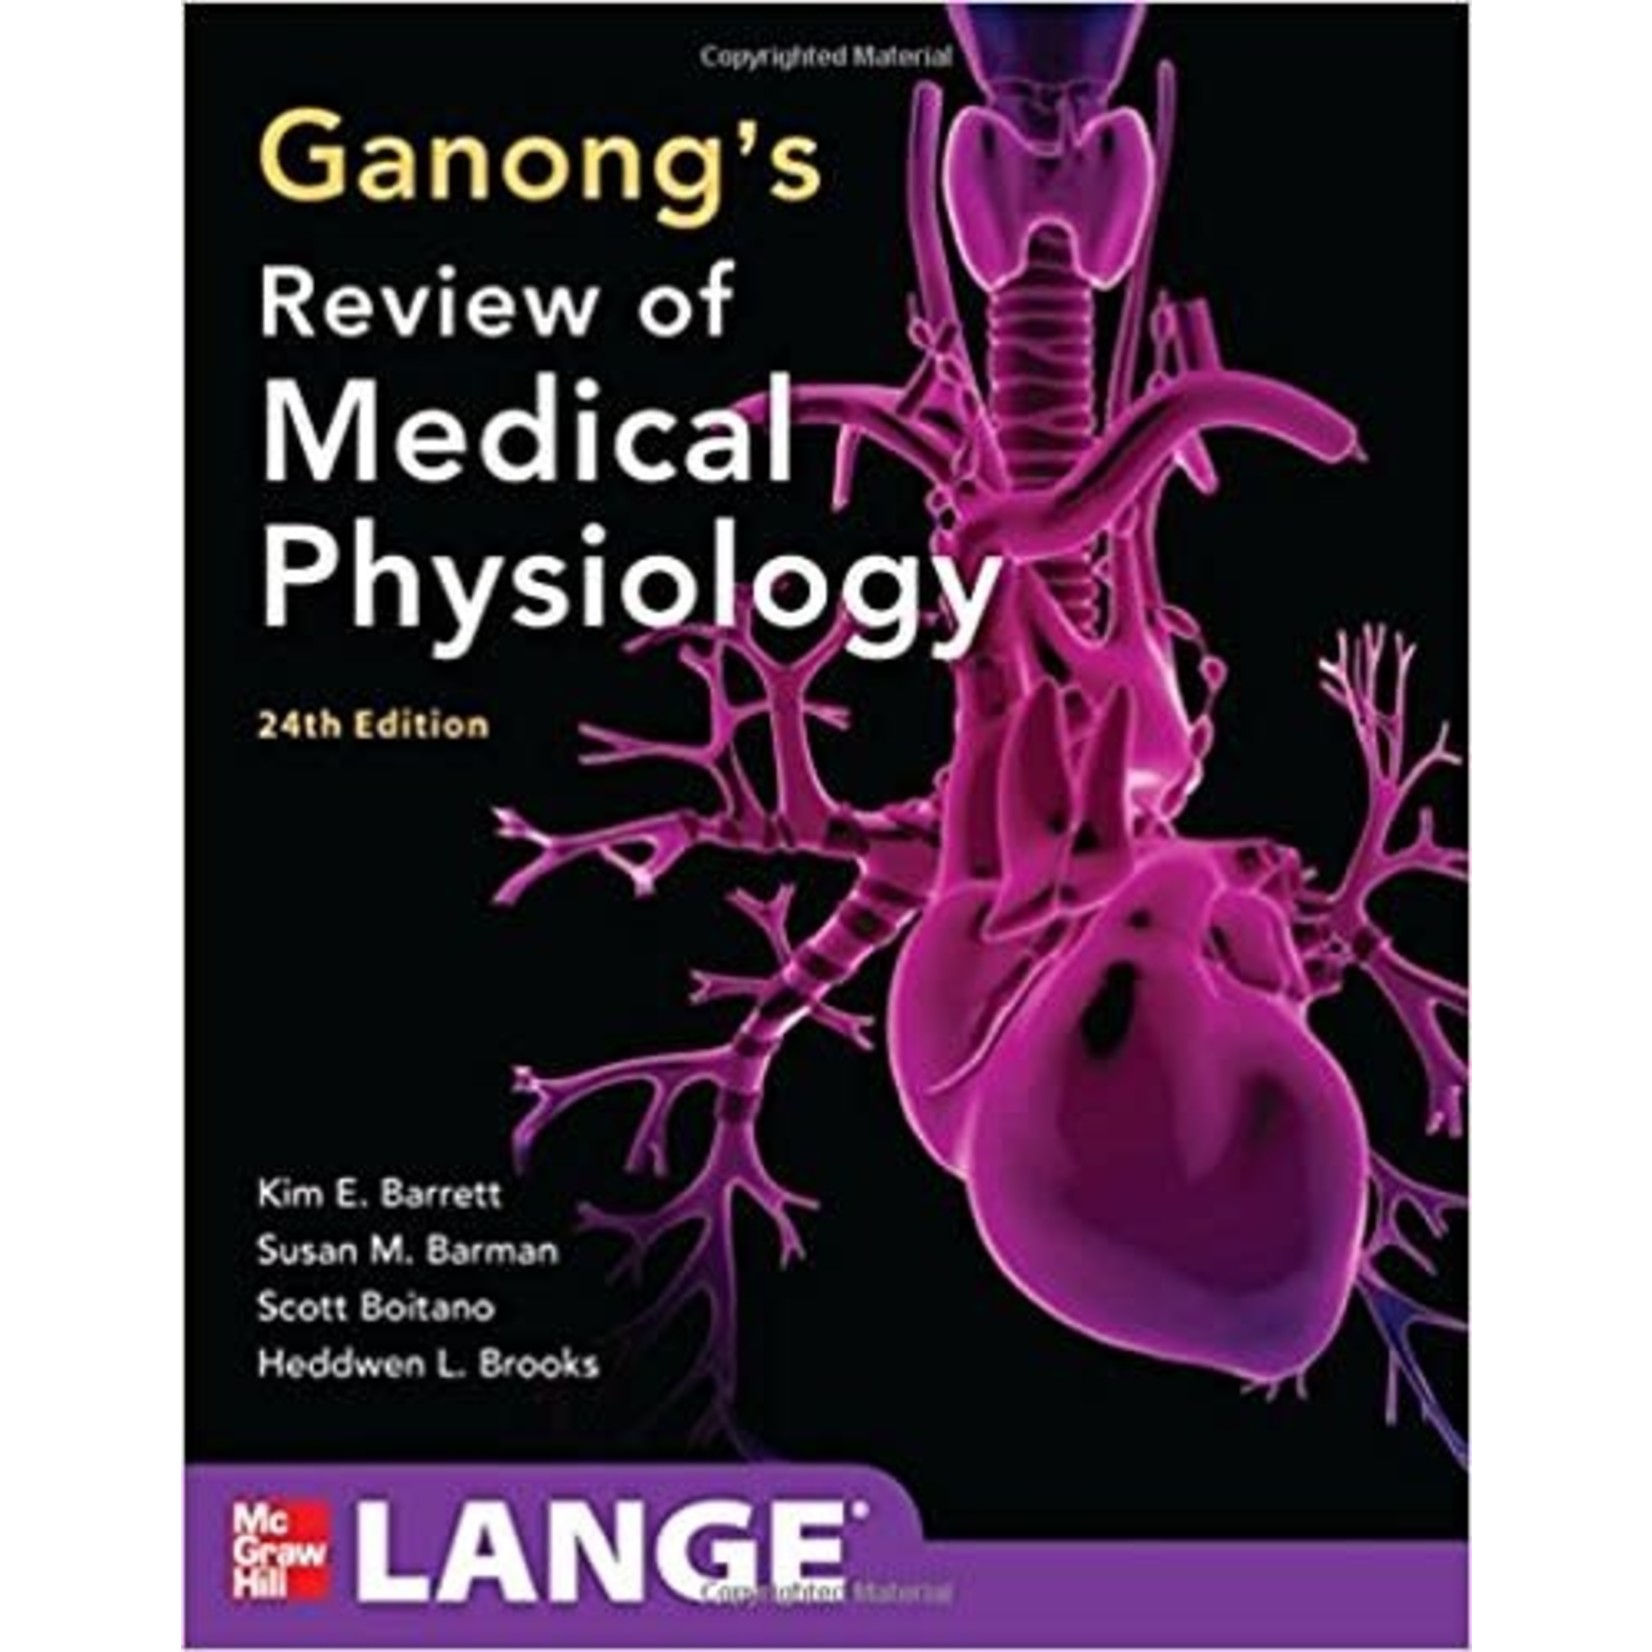 GANONG'S REVIEW OF MEDICAL PHYSIOLOGY 24TH ED